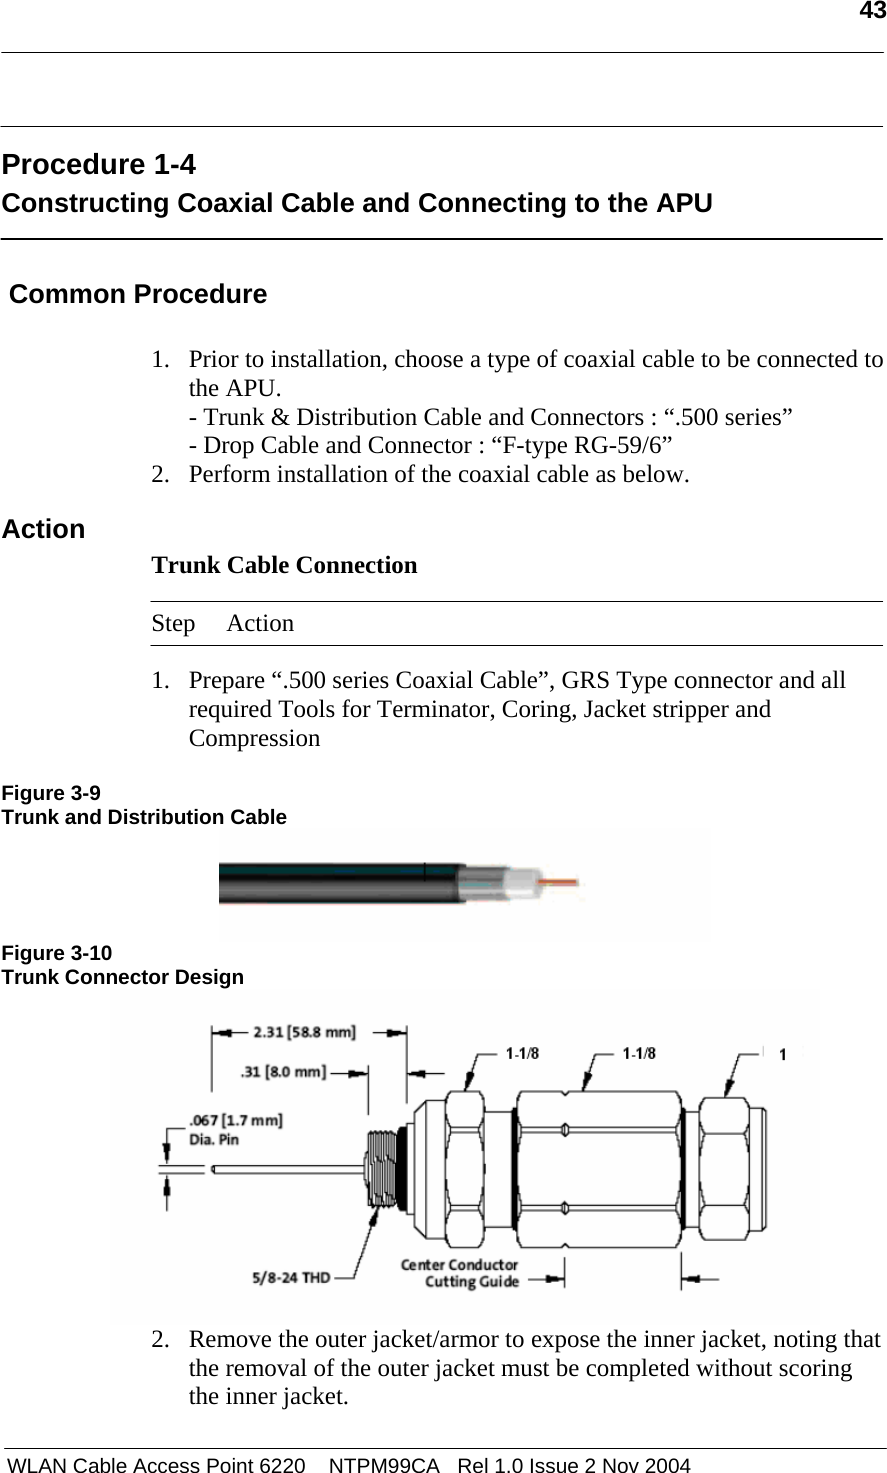   43   WLAN Cable Access Point 6220    NTPM99CA   Rel 1.0 Issue 2 Nov 2004  Procedure 1-4 Constructing Coaxial Cable and Connecting to the APU   Common Procedure  1. Prior to installation, choose a type of coaxial cable to be connected to the APU. - Trunk &amp; Distribution Cable and Connectors : “.500 series” - Drop Cable and Connector : “F-type RG-59/6” 2. Perform installation of the coaxial cable as below. Action Trunk Cable Connection   Step Action  1. Prepare “.500 series Coaxial Cable”, GRS Type connector and all required Tools for Terminator, Coring, Jacket stripper and Compression   Figure 3-9 Trunk and Distribution Cable  Figure 3-10 Trunk Connector Design  2. Remove the outer jacket/armor to expose the inner jacket, noting that the removal of the outer jacket must be completed without scoring the inner jacket. 